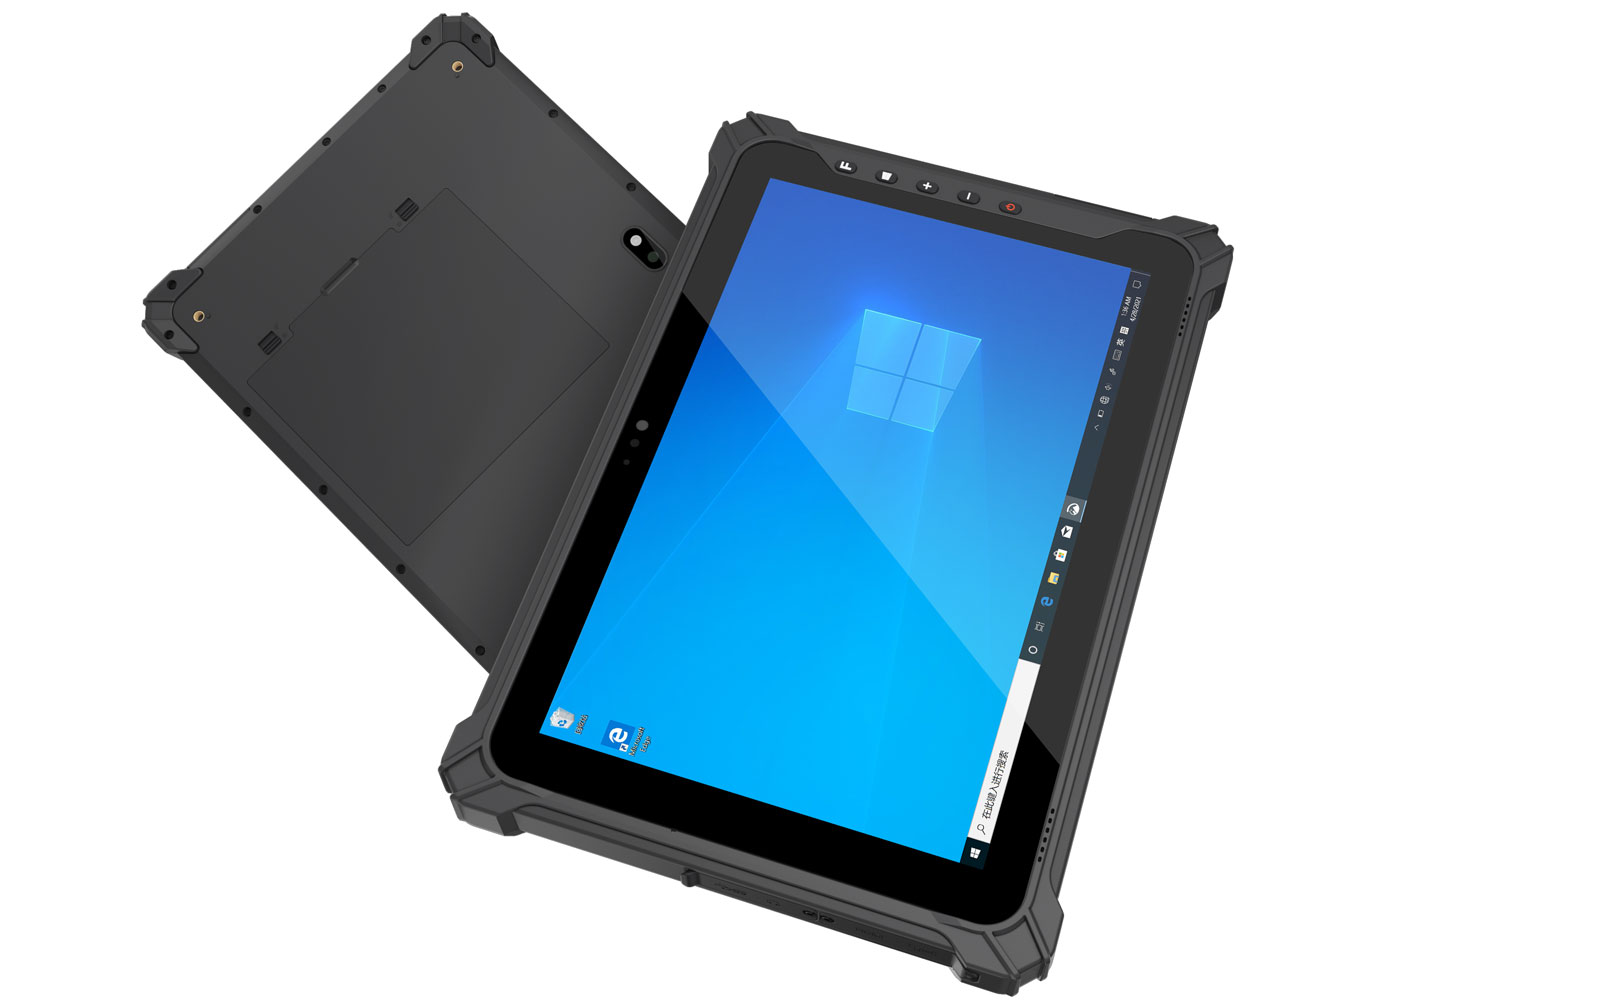 MUNBYN IRT04 Android Rugged Tablet PC